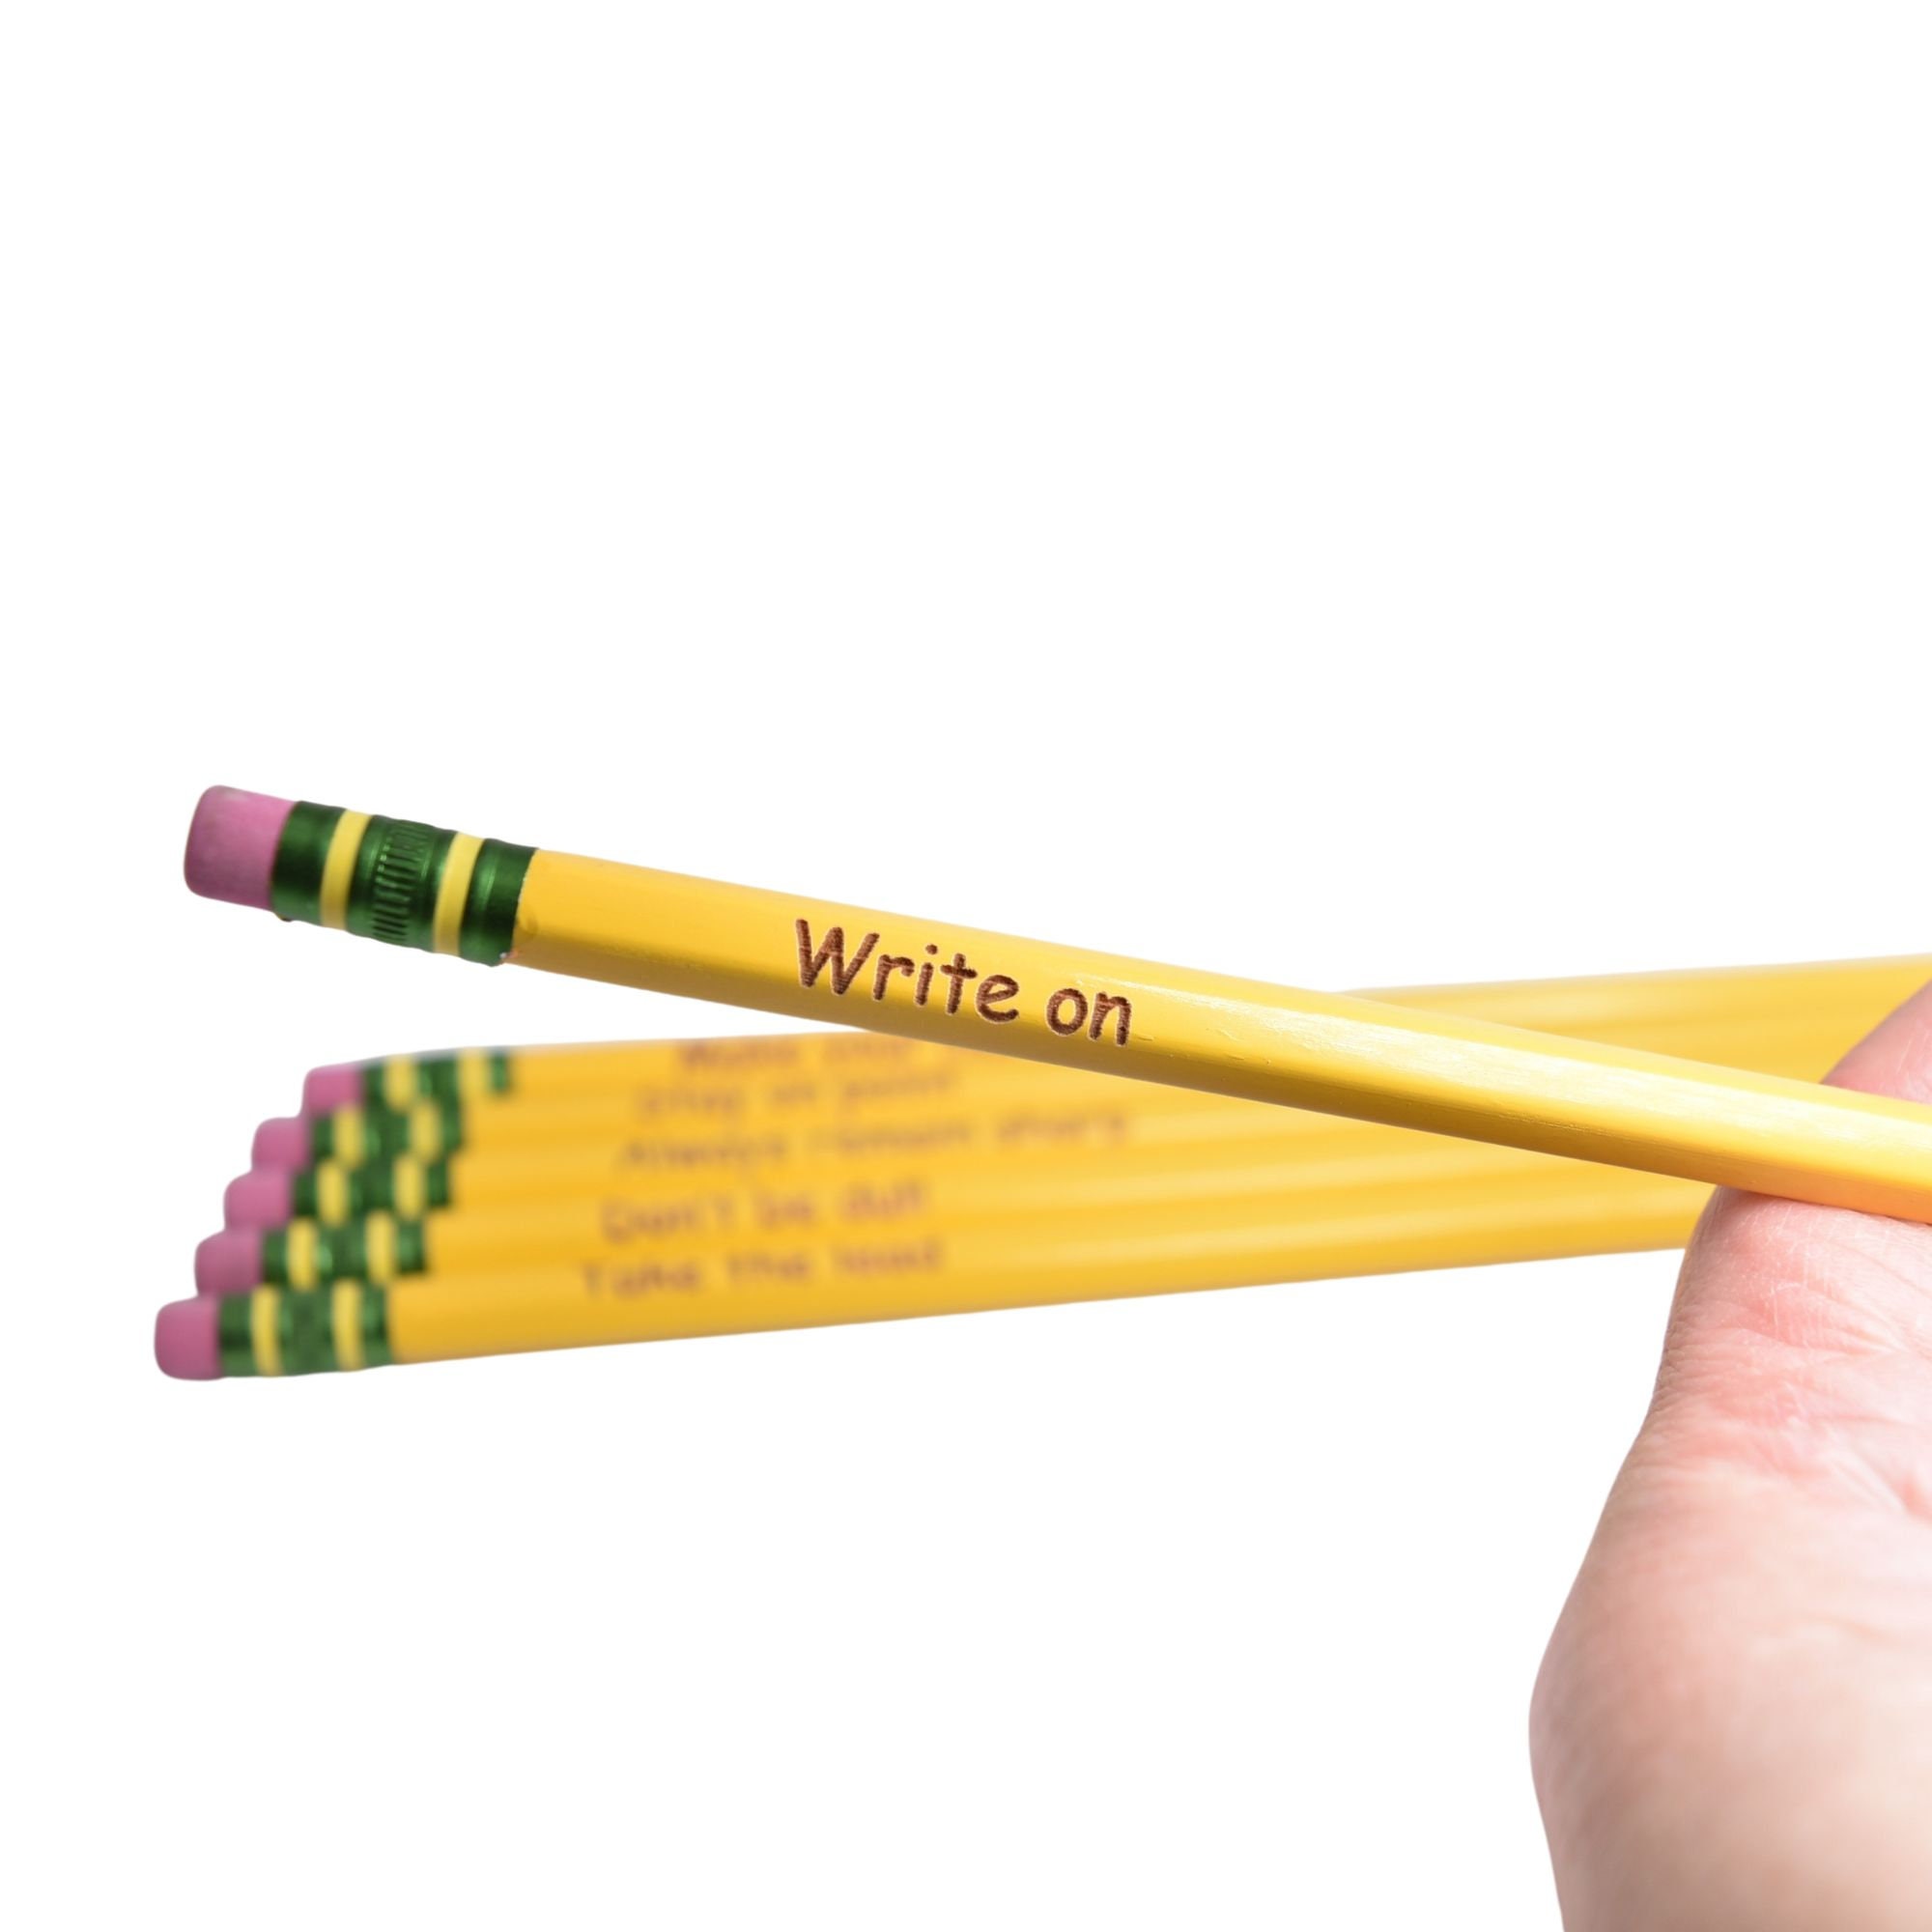 Adventure Awaits Pencil 6 Pack in Yellow, Back to School Pencils, Fun  Stocking Gift, Yellow Pencils, Travel Theme Pencil, School Supplies 